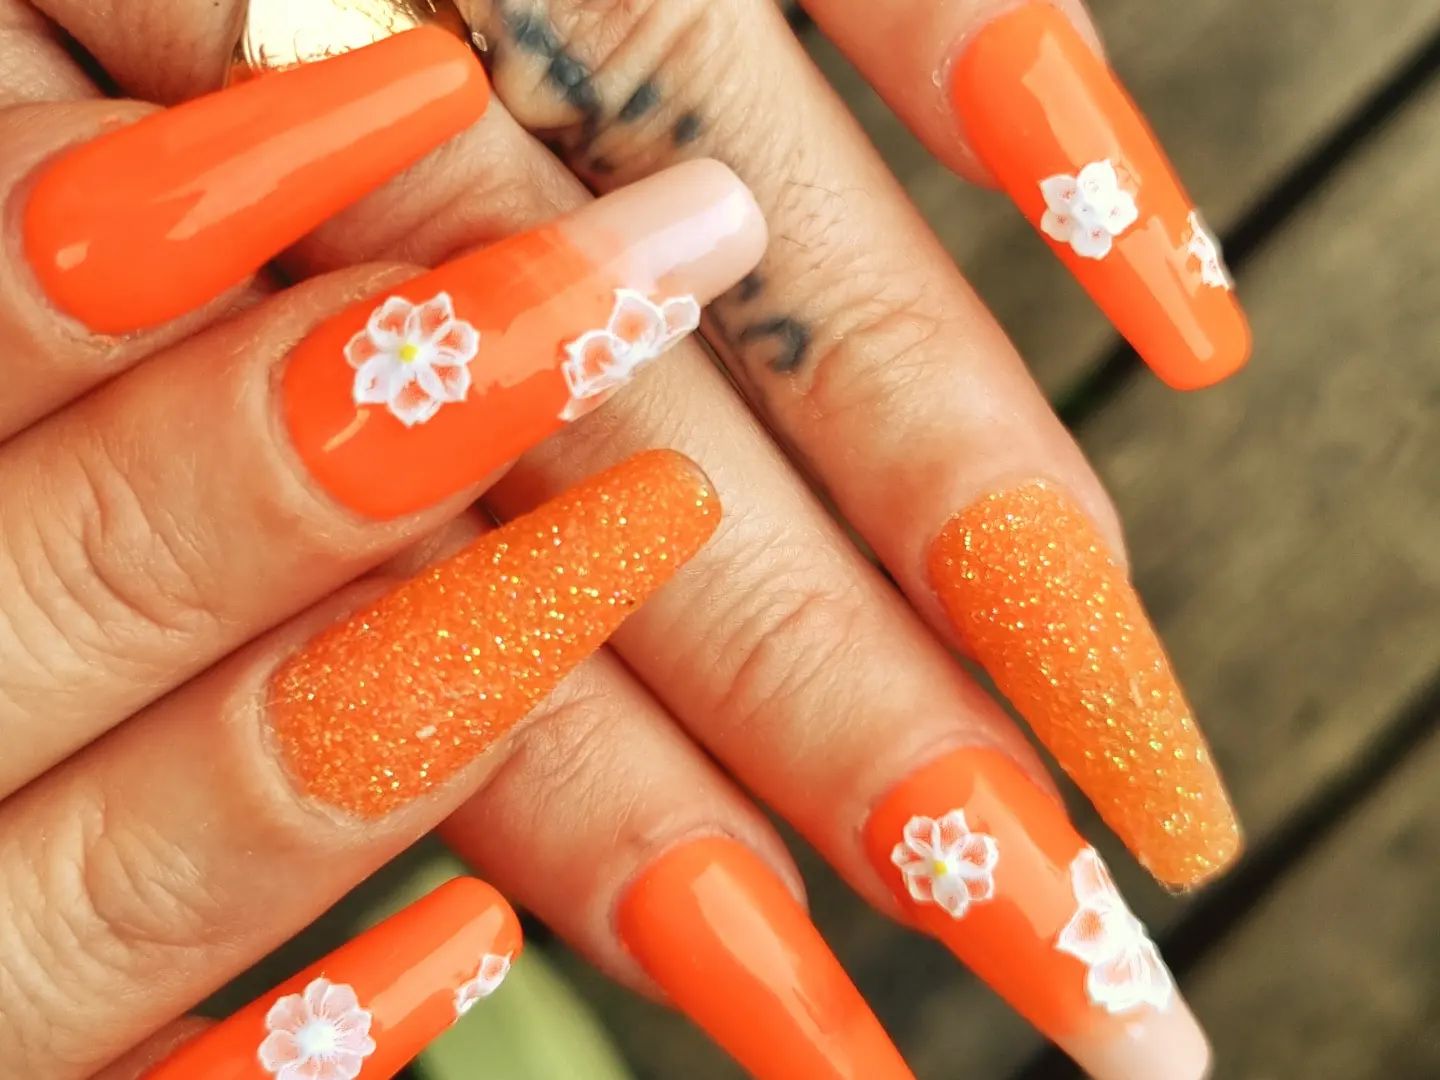 Orange is perfect for the summertime, especially if you're going on vacation because it'll help you feel like you're in the tropics without having to actually go there. Plus, if you decorate it with glitters and flowers, it will be more awesome!